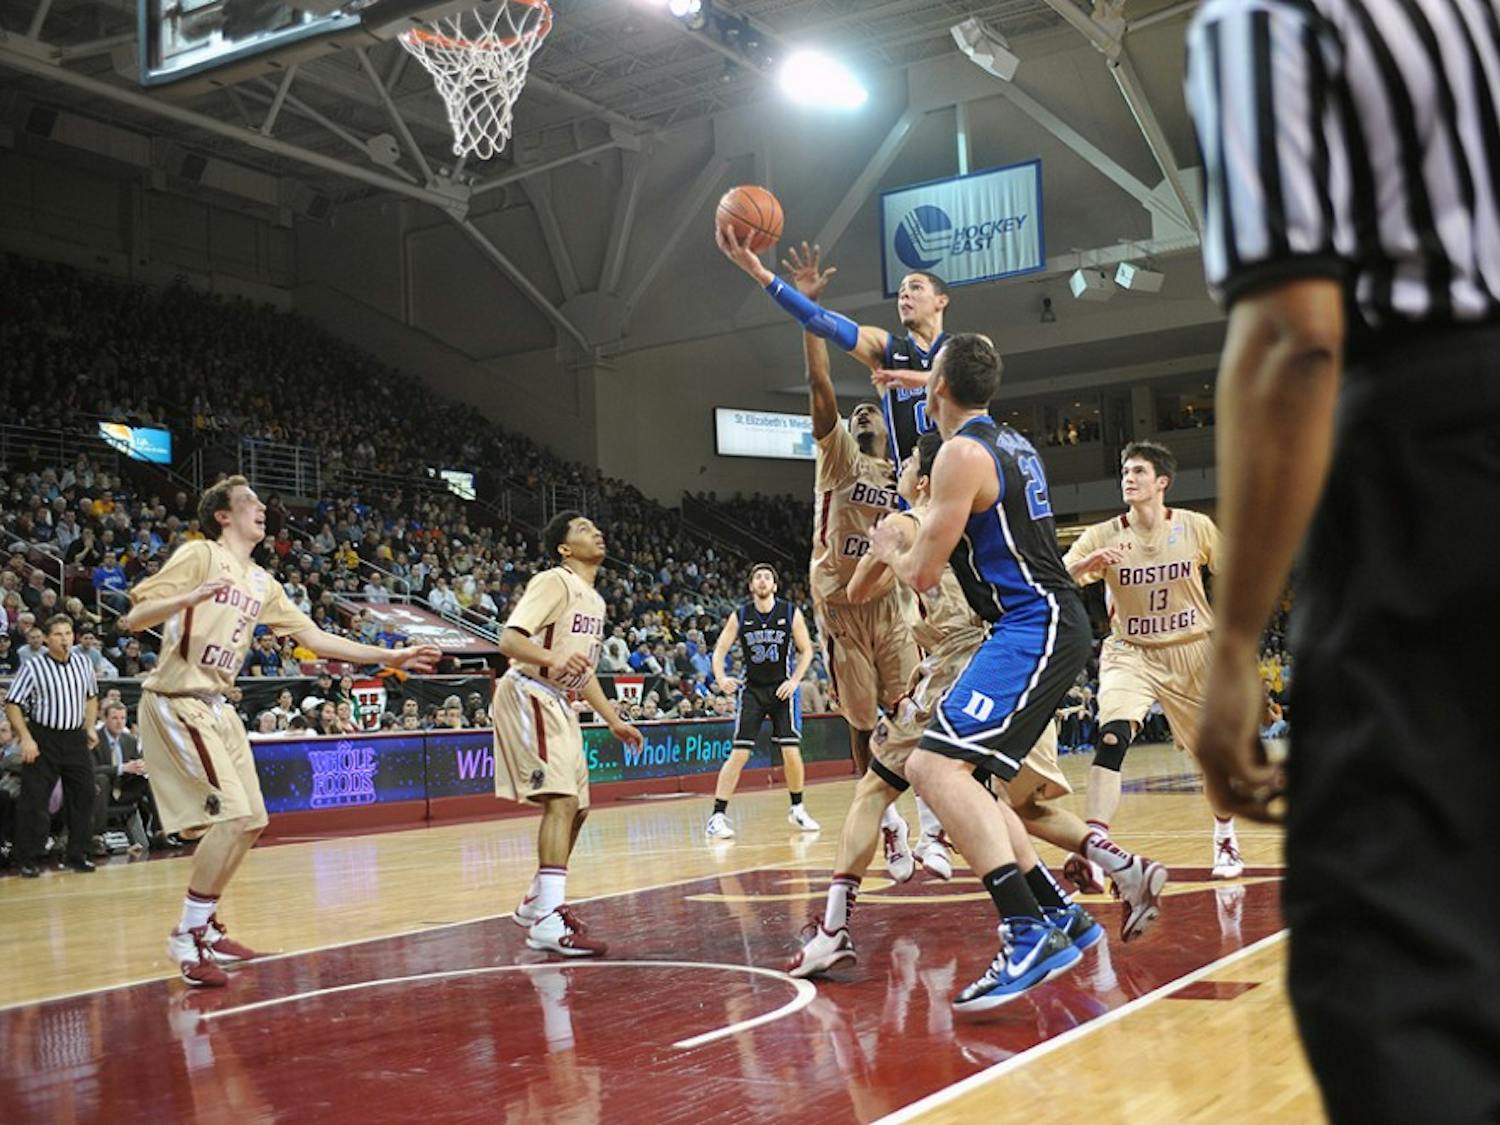 Austin Rivers led Duke with 16 points and seven rebounds in a dominant 75-50 win over Boston College Sunday evening.